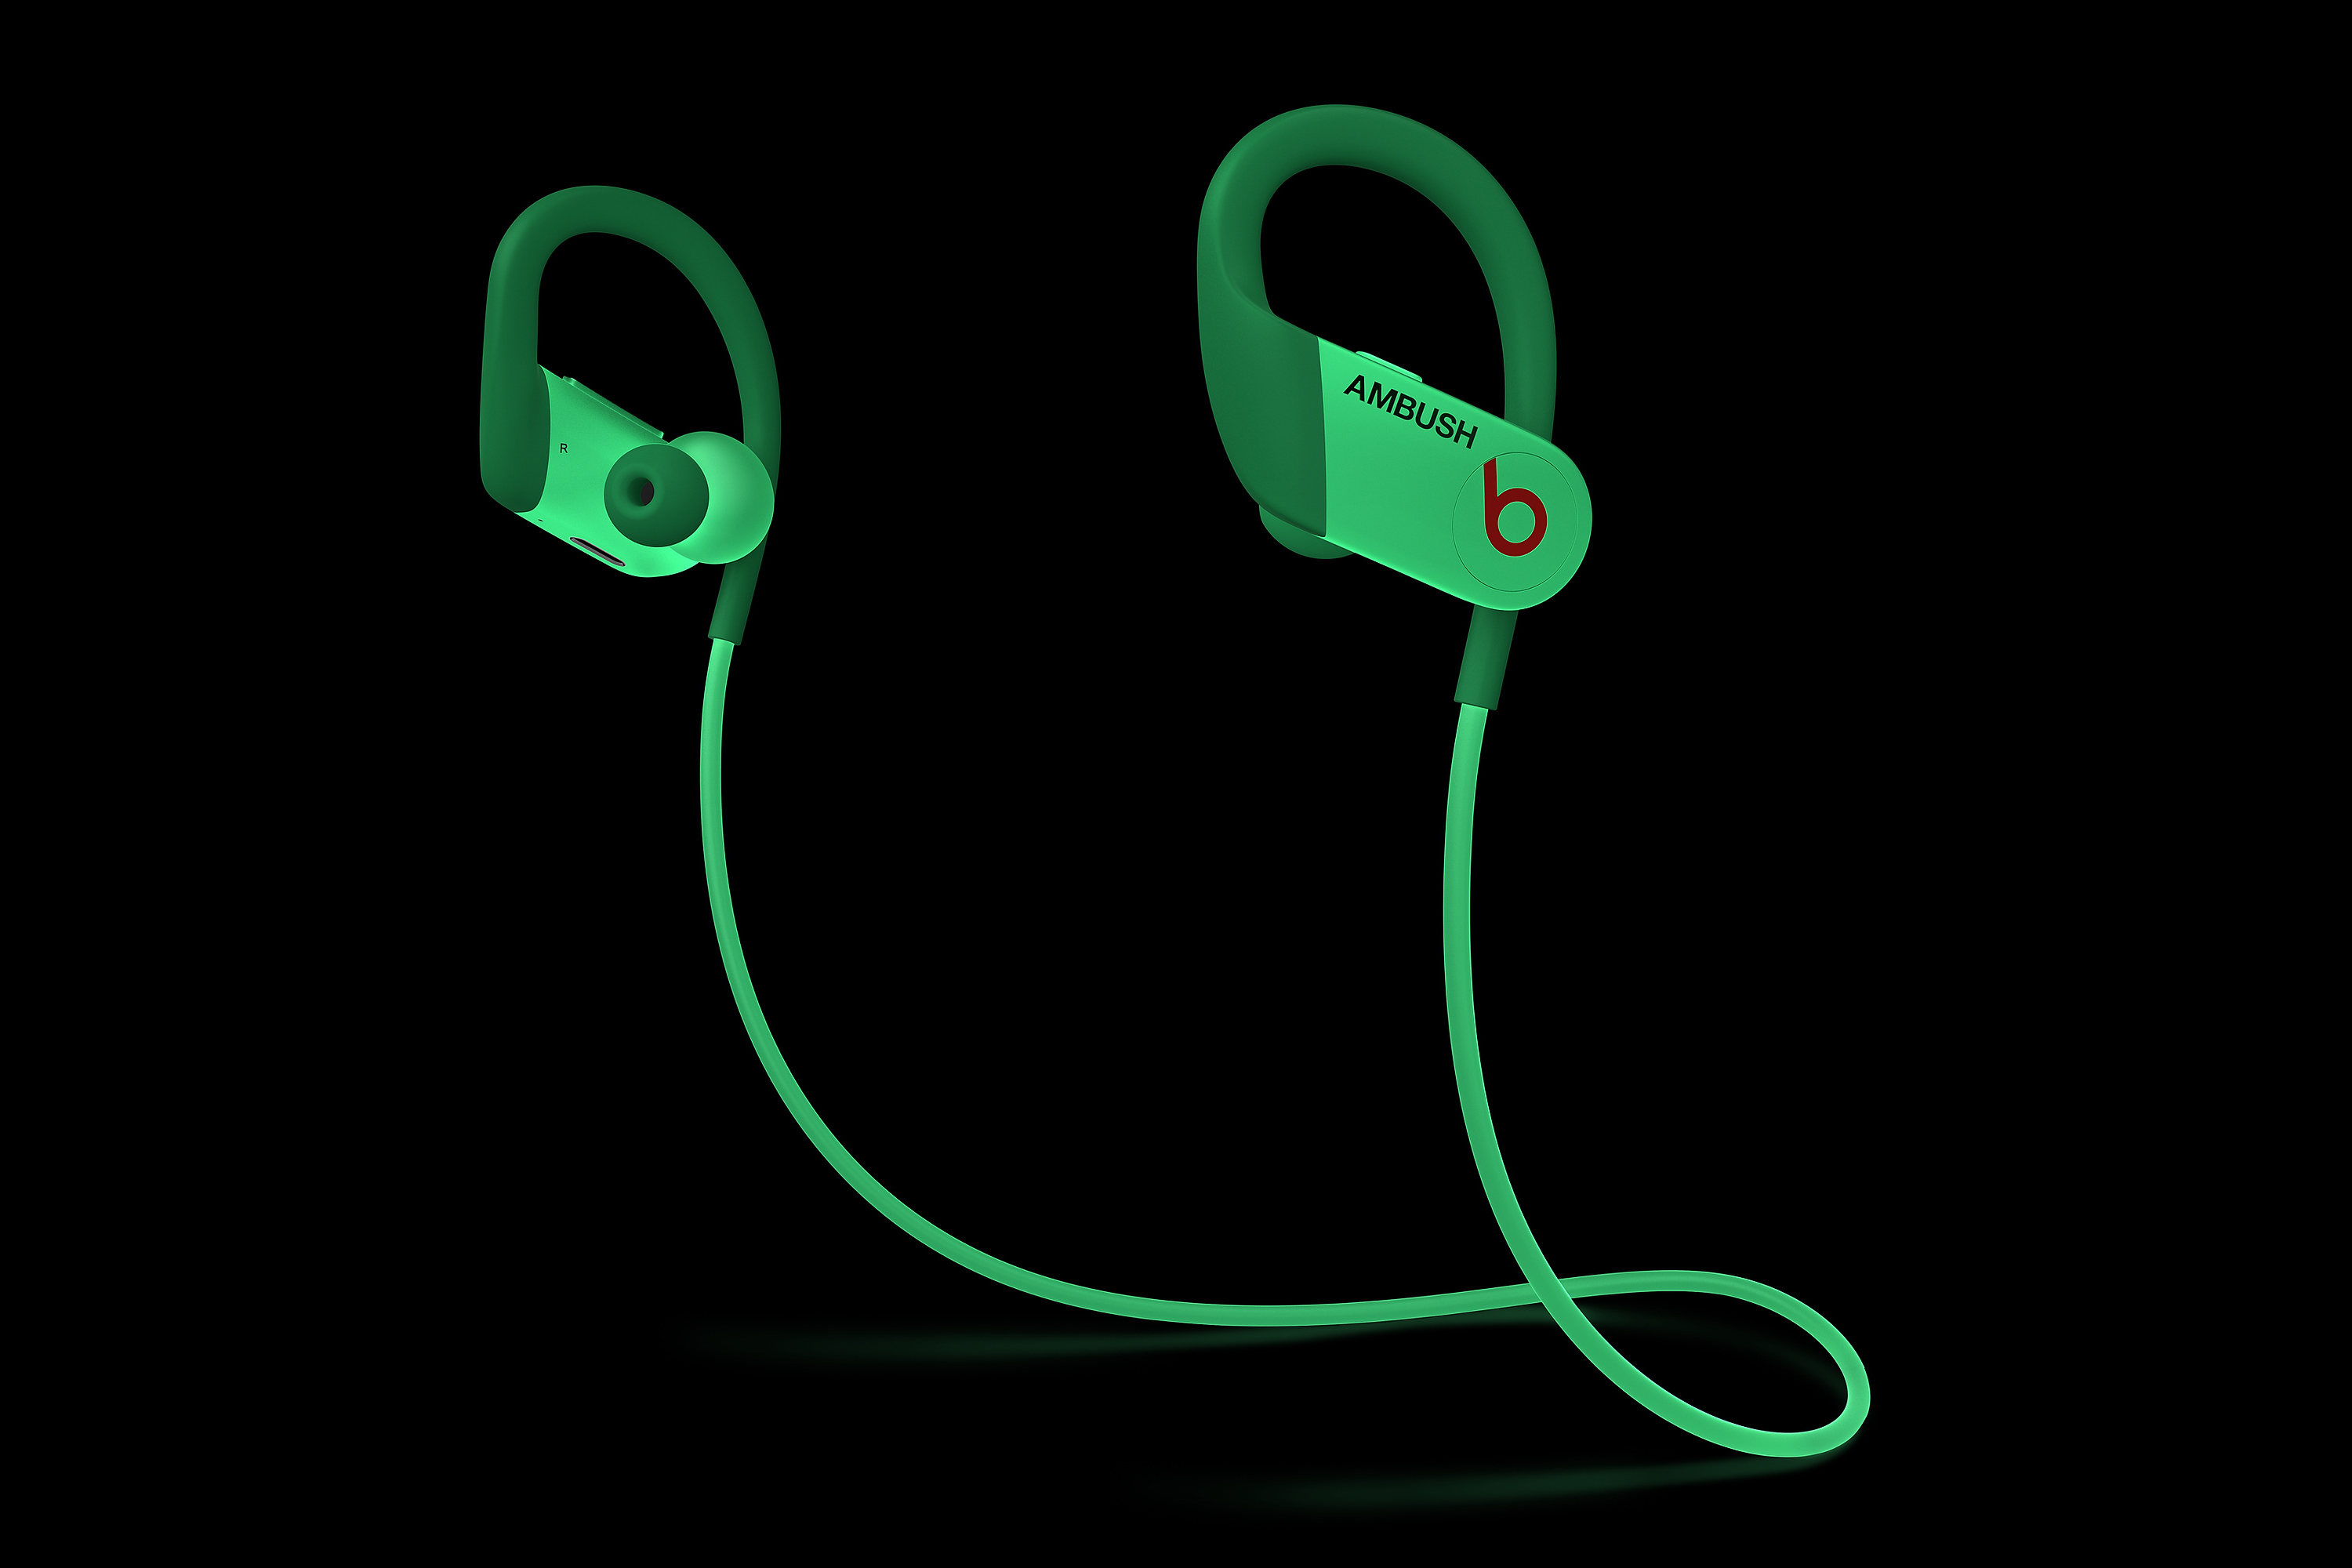 Beats collaborate with Ambush for special edition glow-in-the-dark Powerbeats